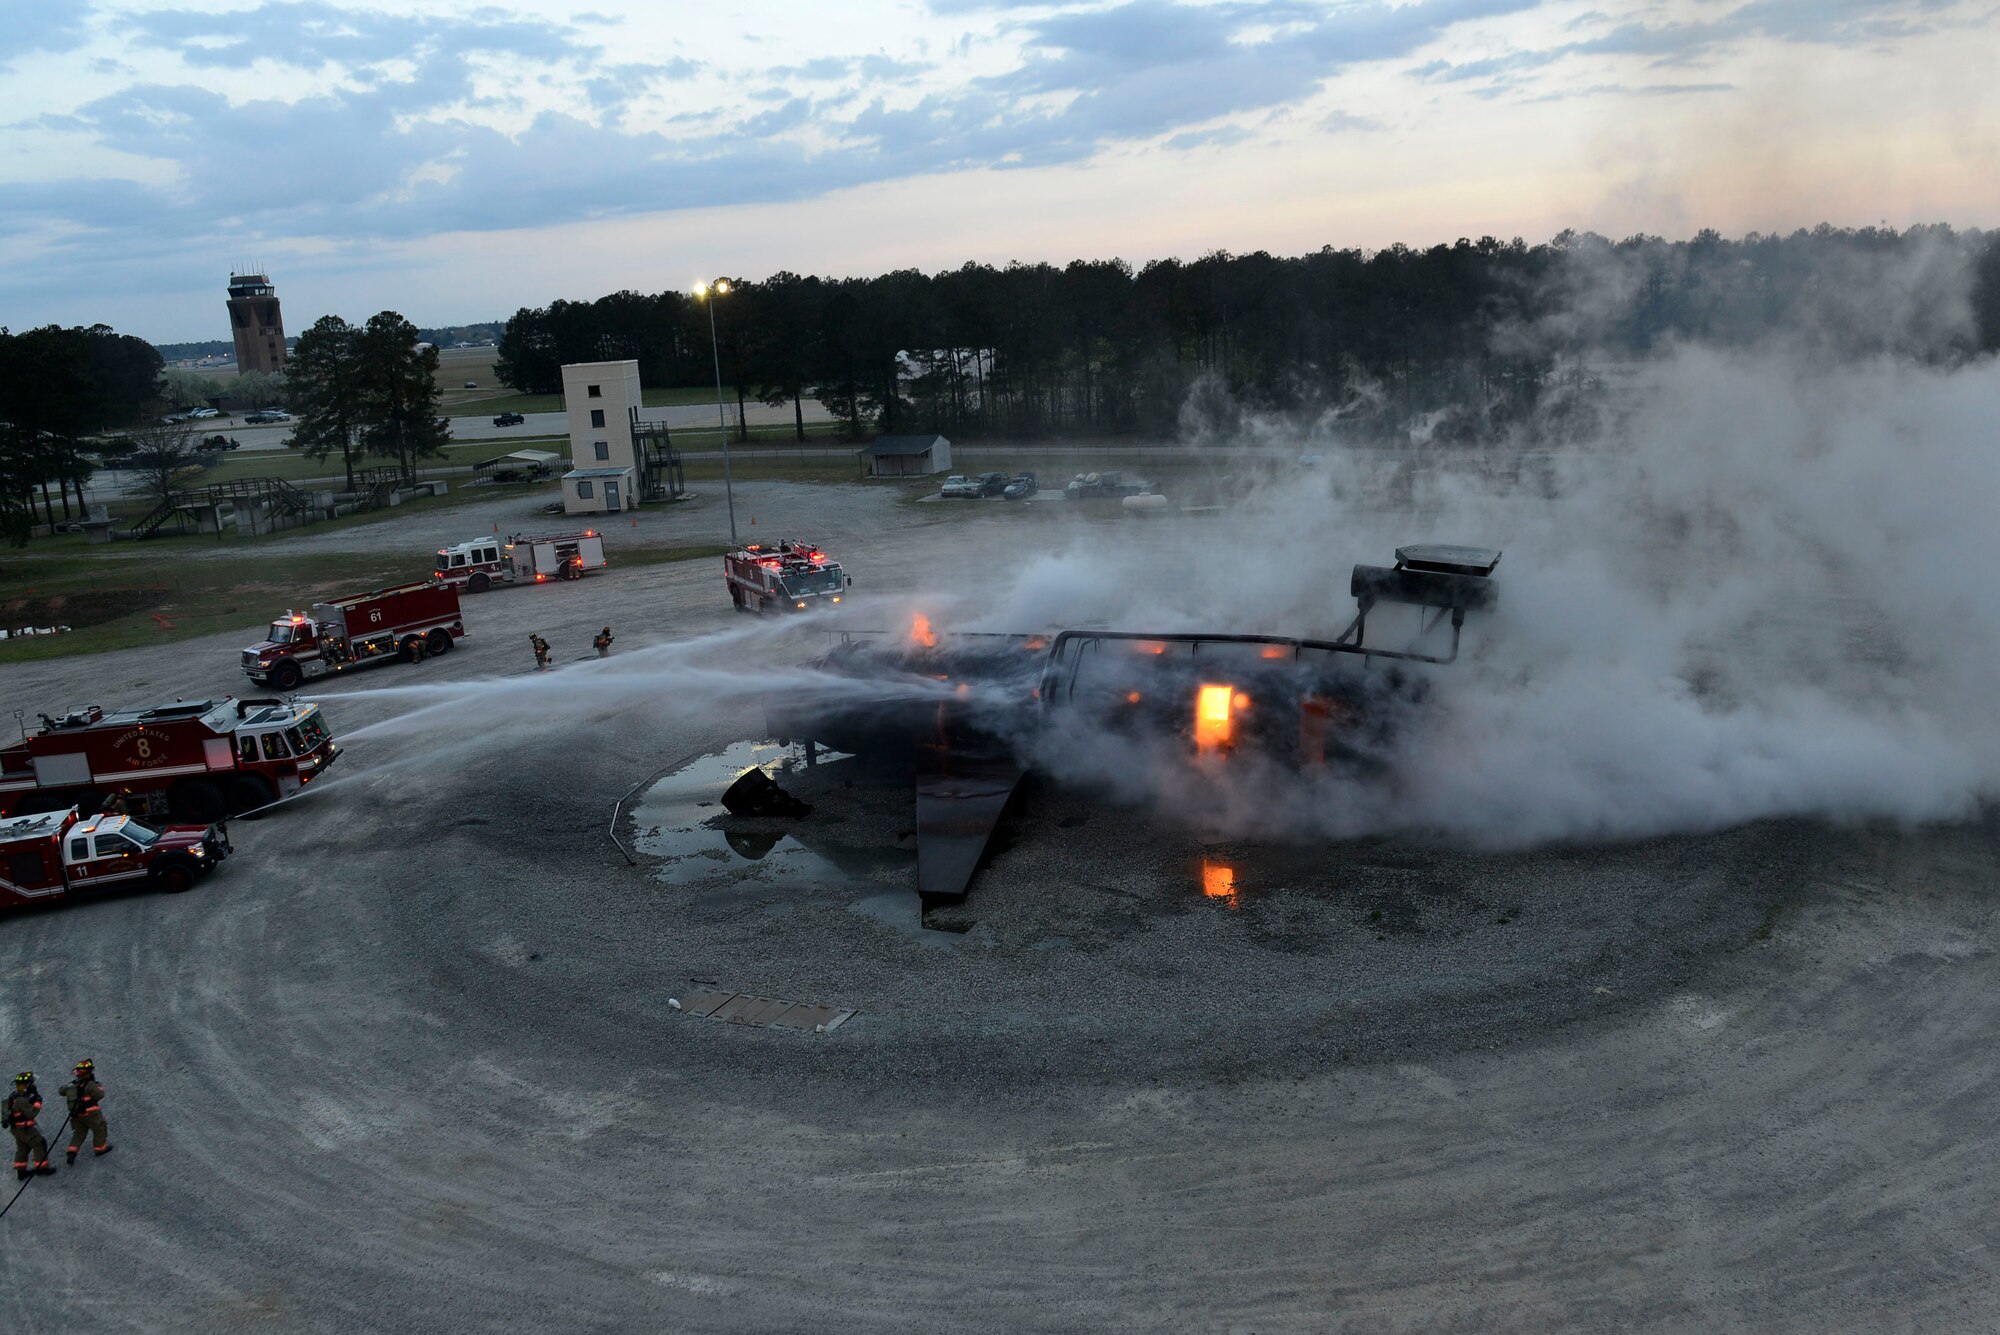 U.S. Airmen assigned to the 20th Civil Engineer Squadron fire department extinguish an aircraft fire during training at Shaw Air Force Base, S.C., March 17, 2016. Firefighters assigned to the 20th CES fire department train on a mock C-130 to test their response time and efficiency in extinguishing an aircraft fire. (U.S. Air Force photo by Airman 1st Class Christopher Maldonado)